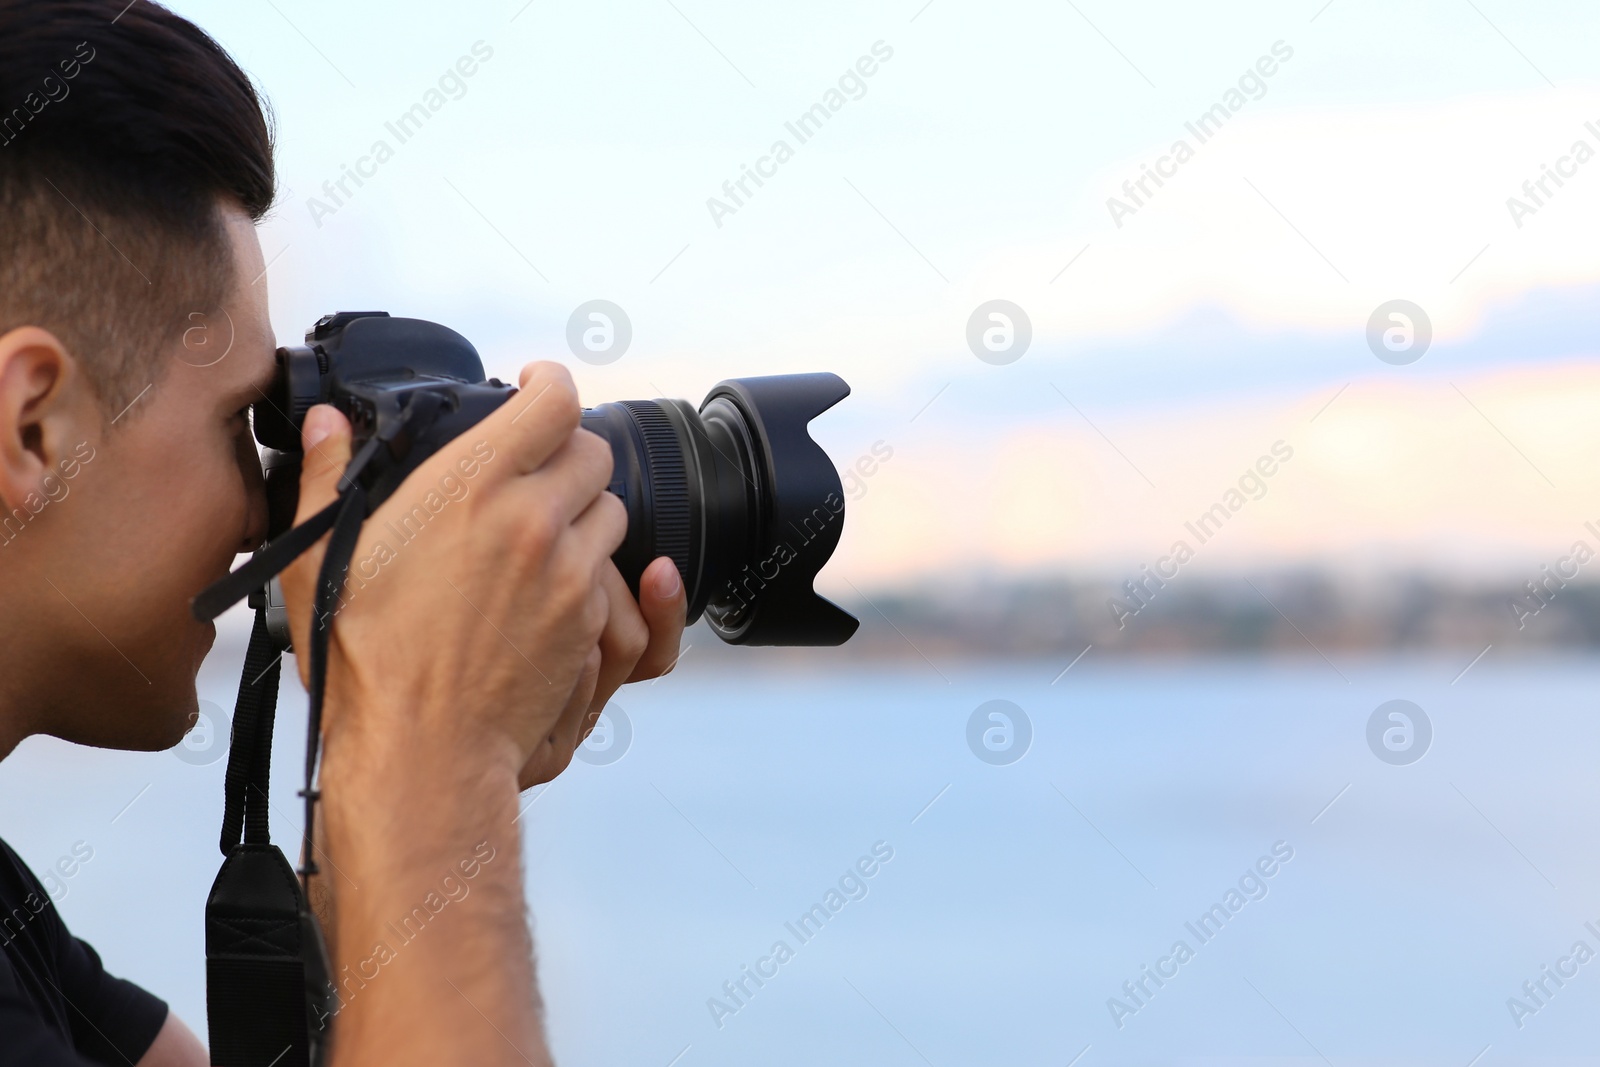 Photo of Photographer taking picture with professional camera near river, closeup